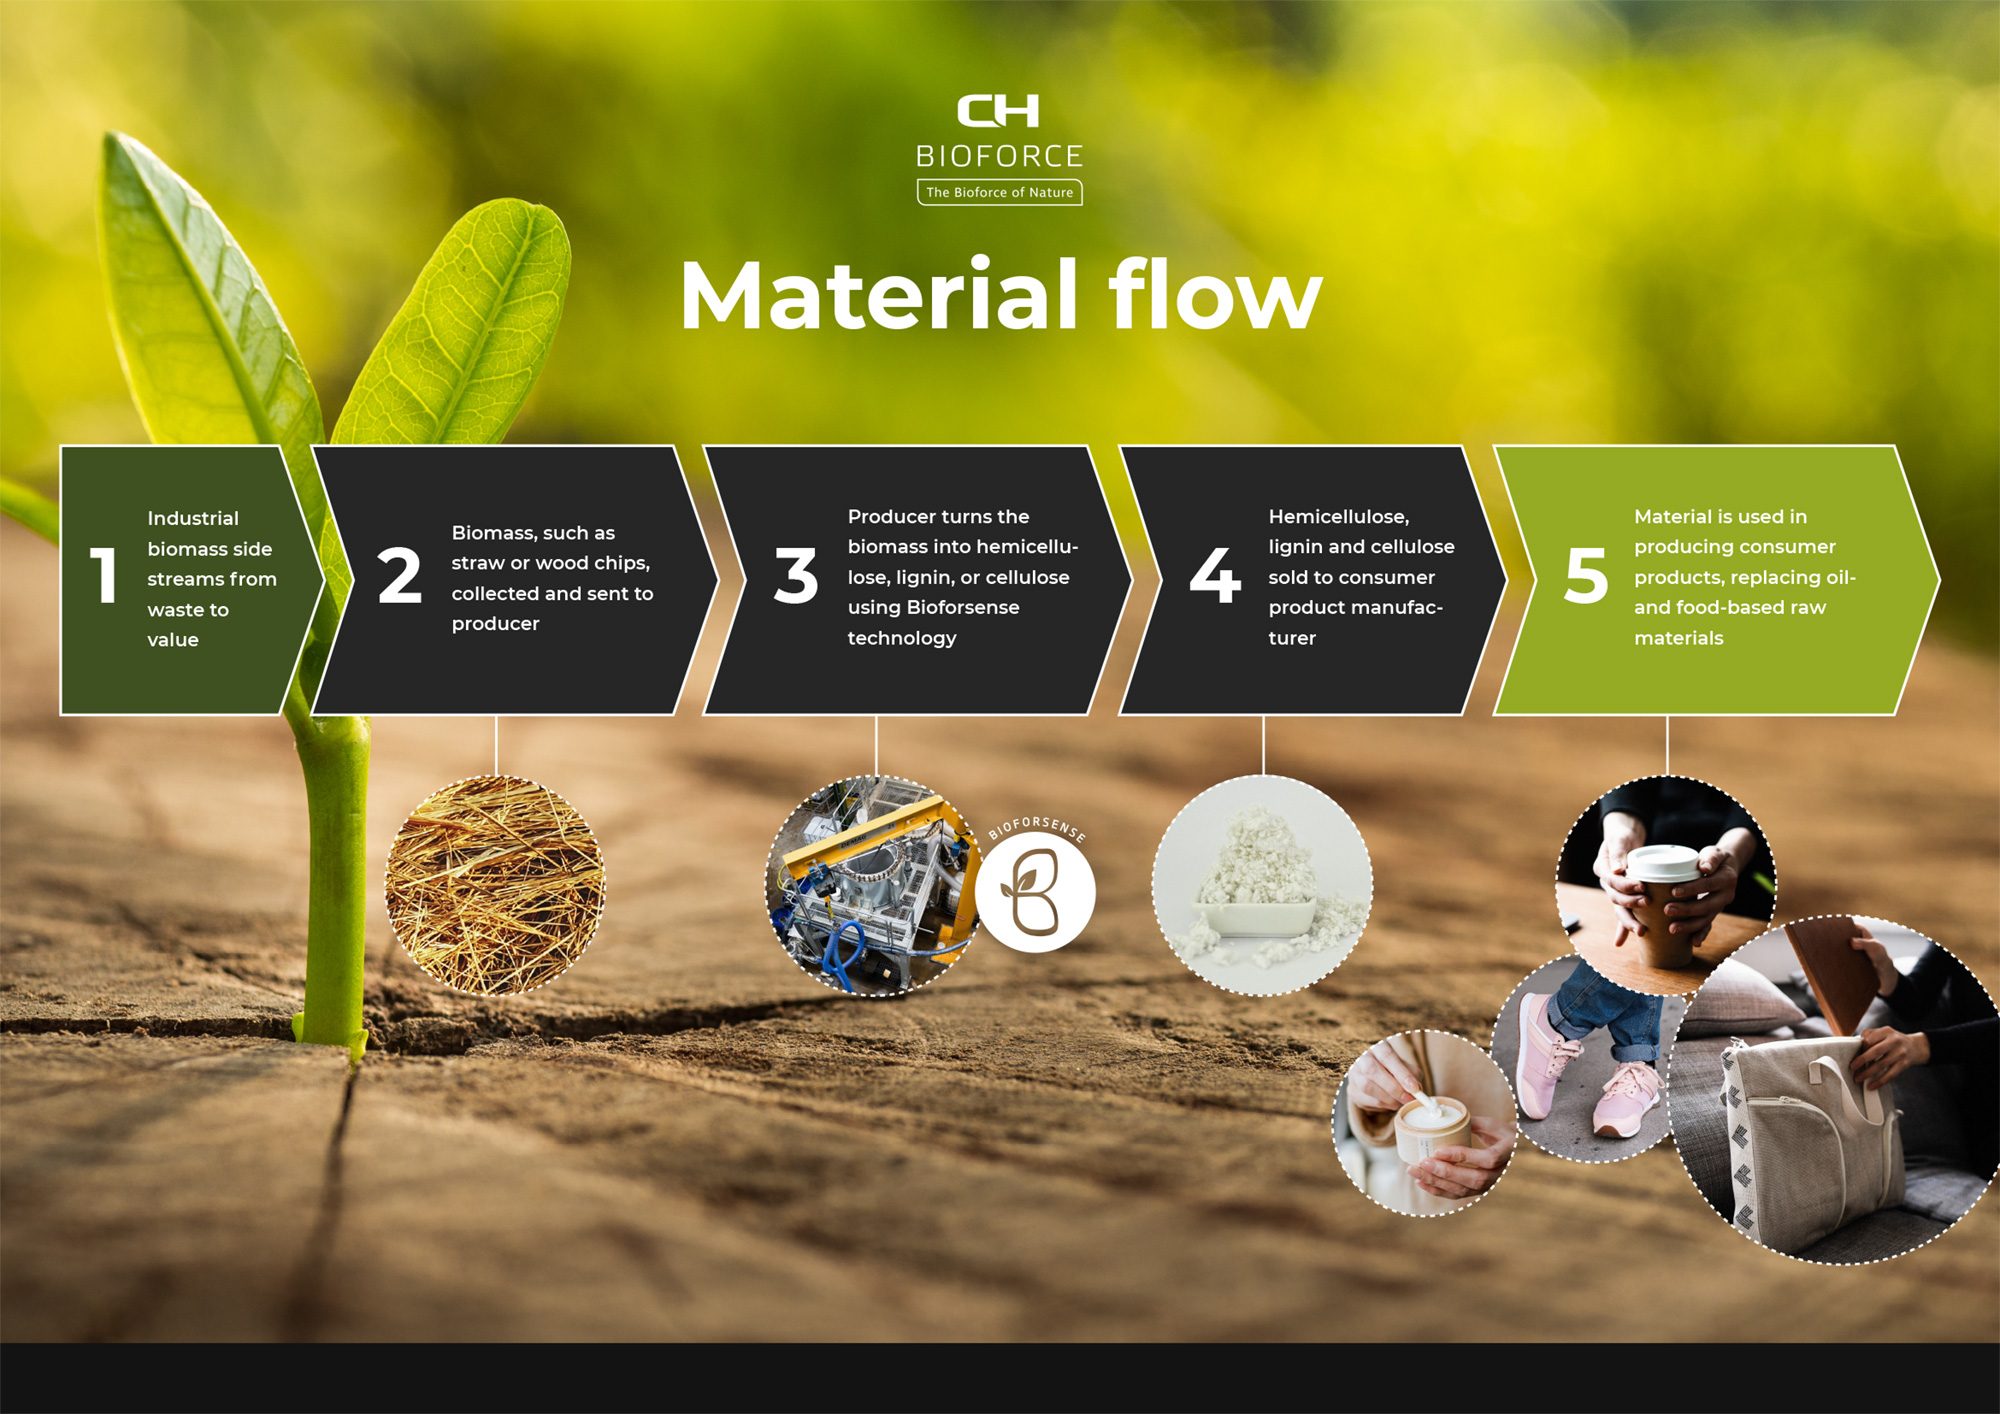 CH-Bioforce Material flow.